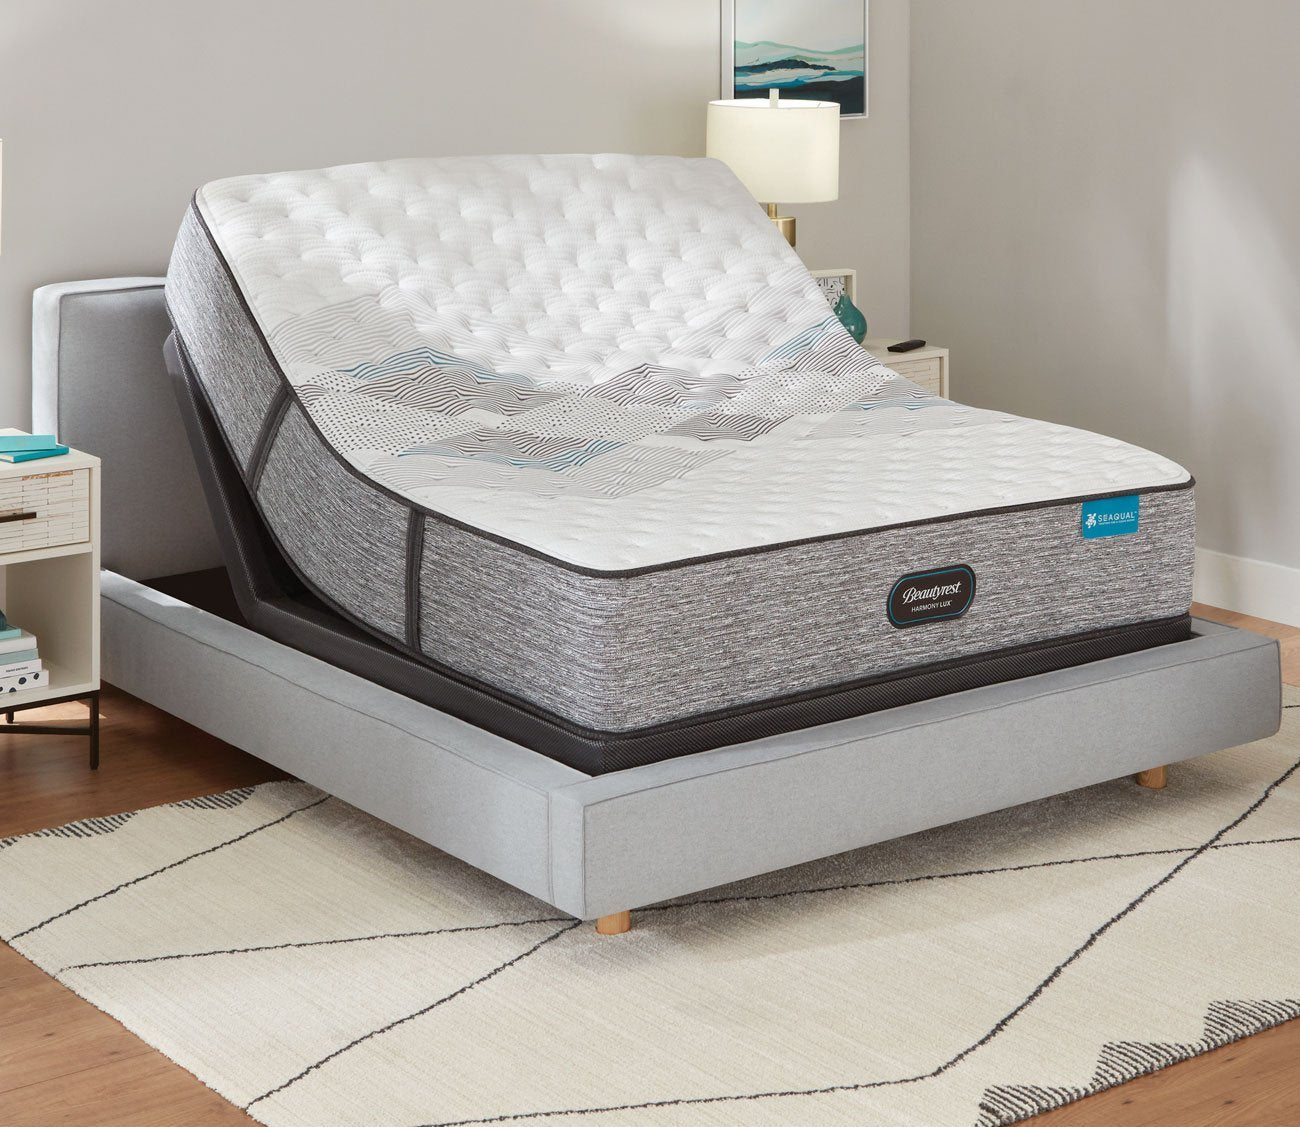 Beautyrest Harmony Lux Carbon Extra Firm Mattress by Simmons